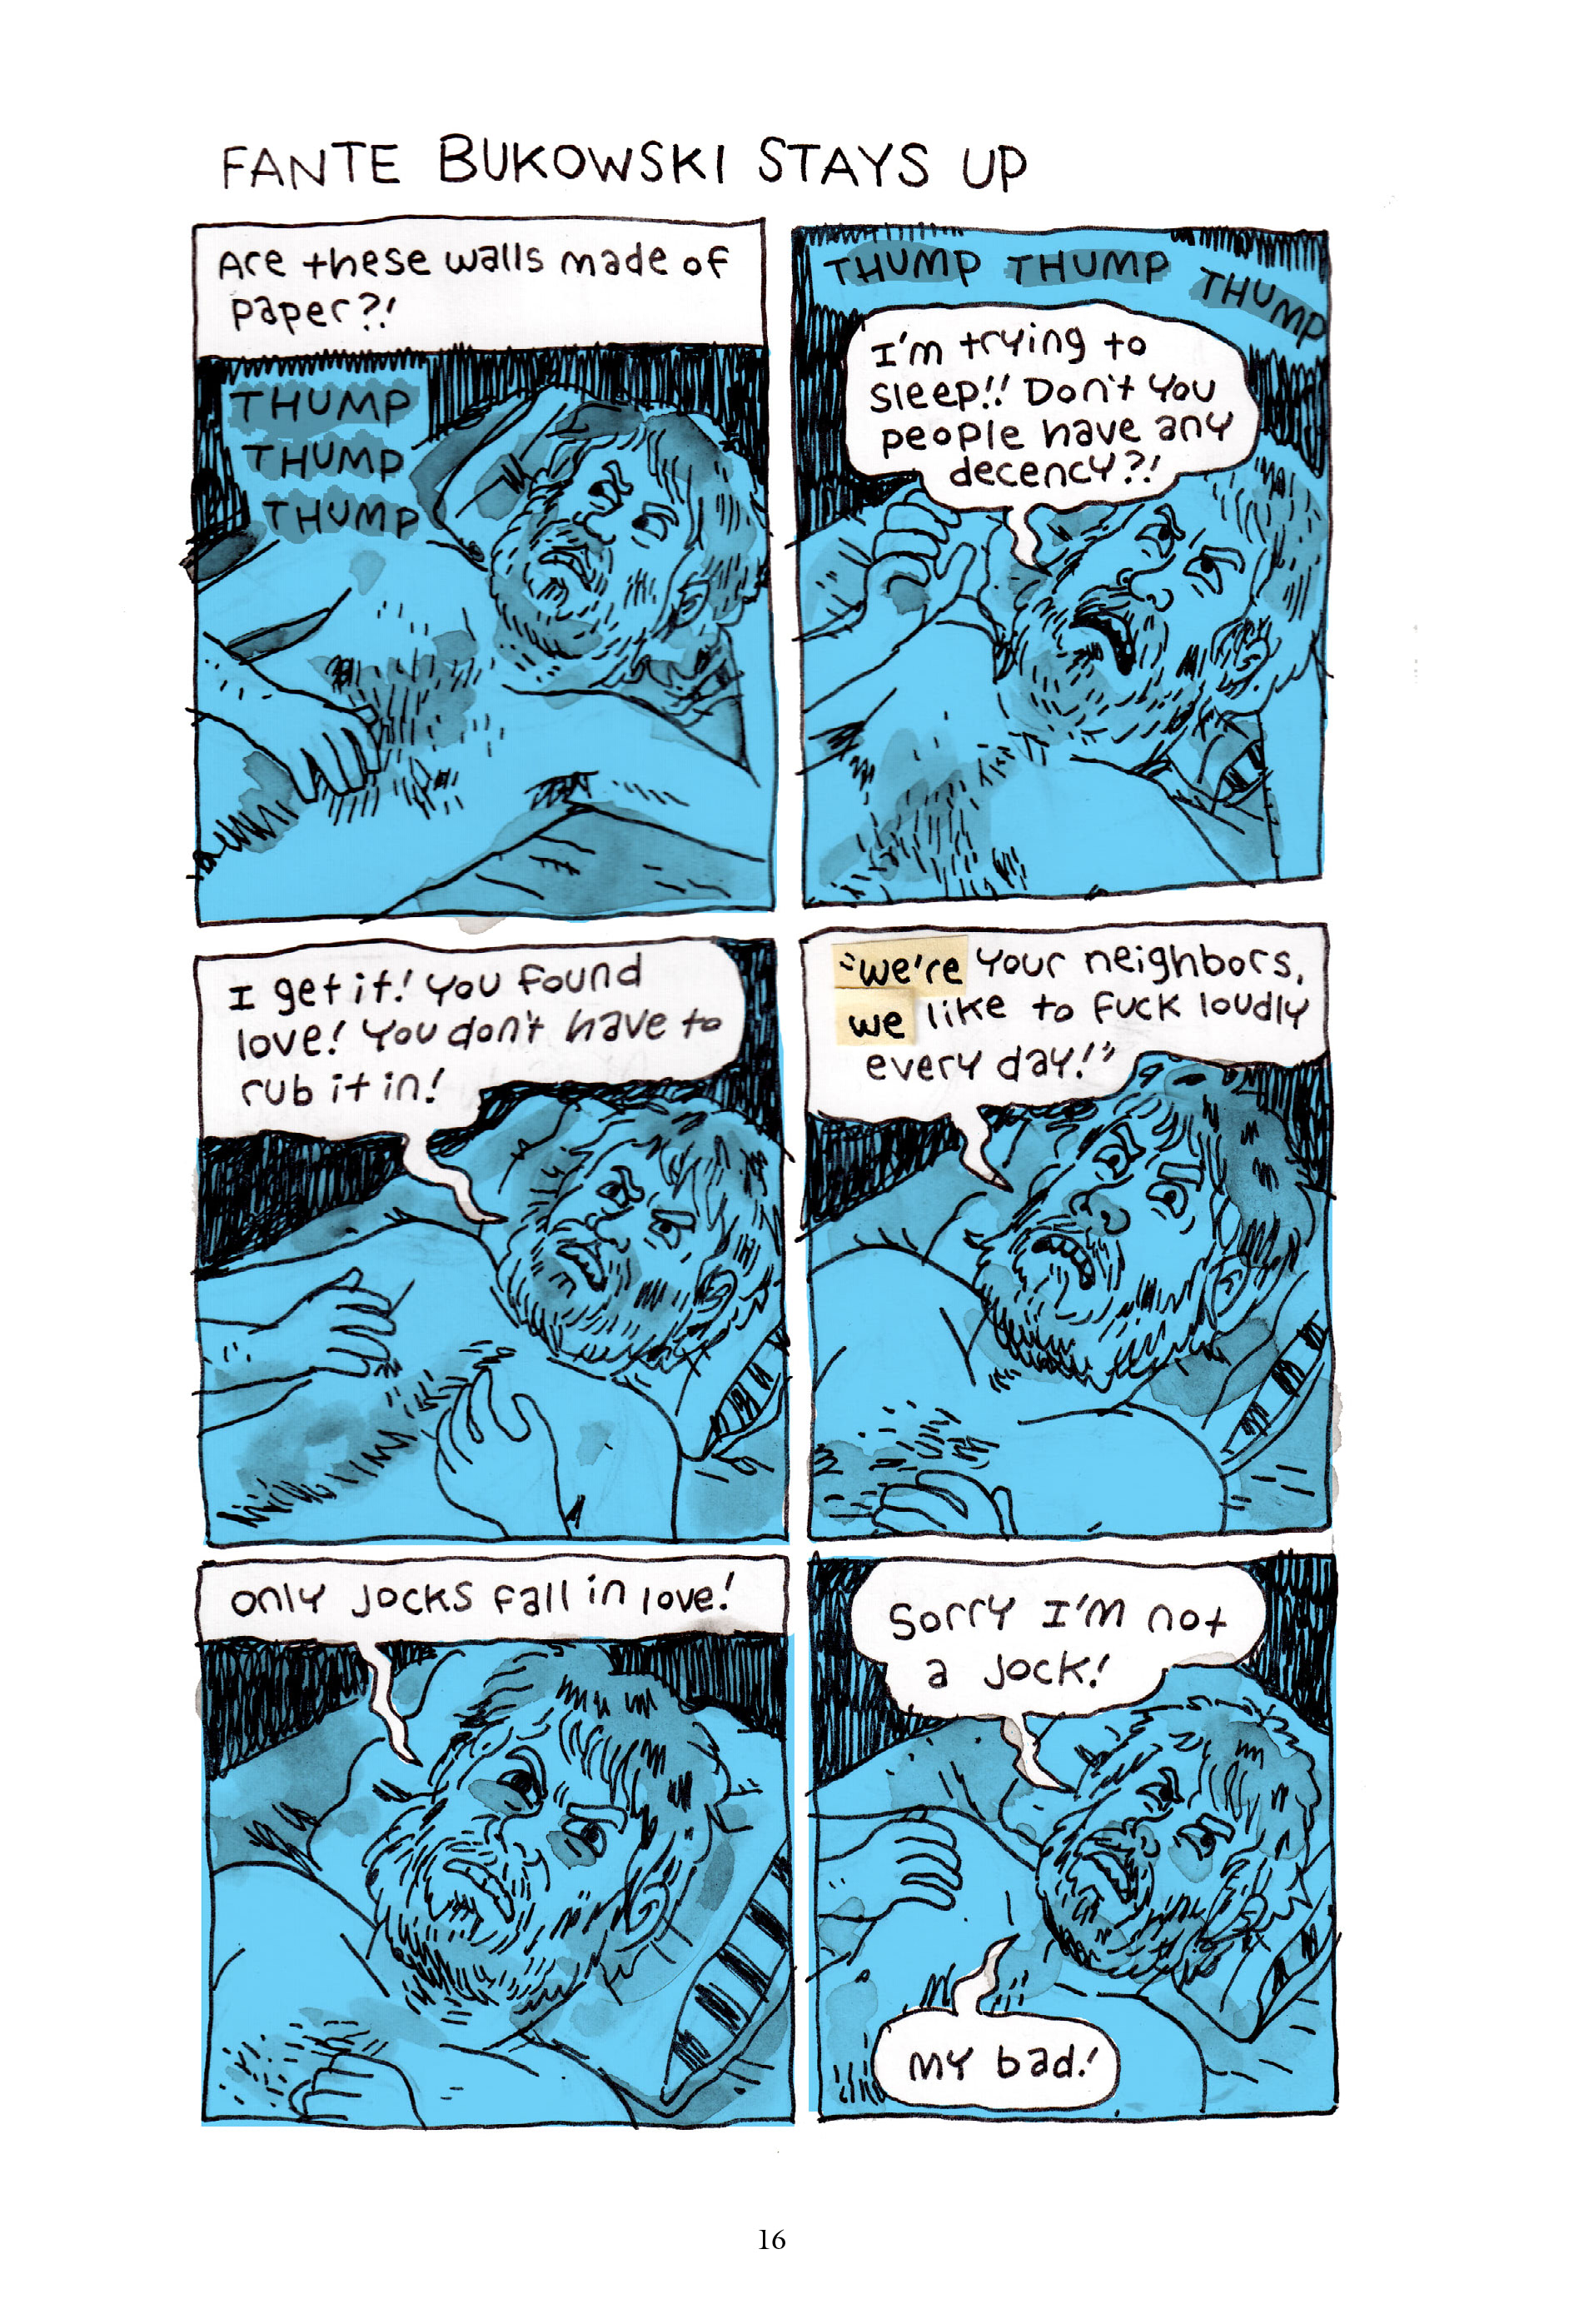 Read online The Complete Works of Fante Bukowski comic -  Issue # TPB (Part 1) - 15